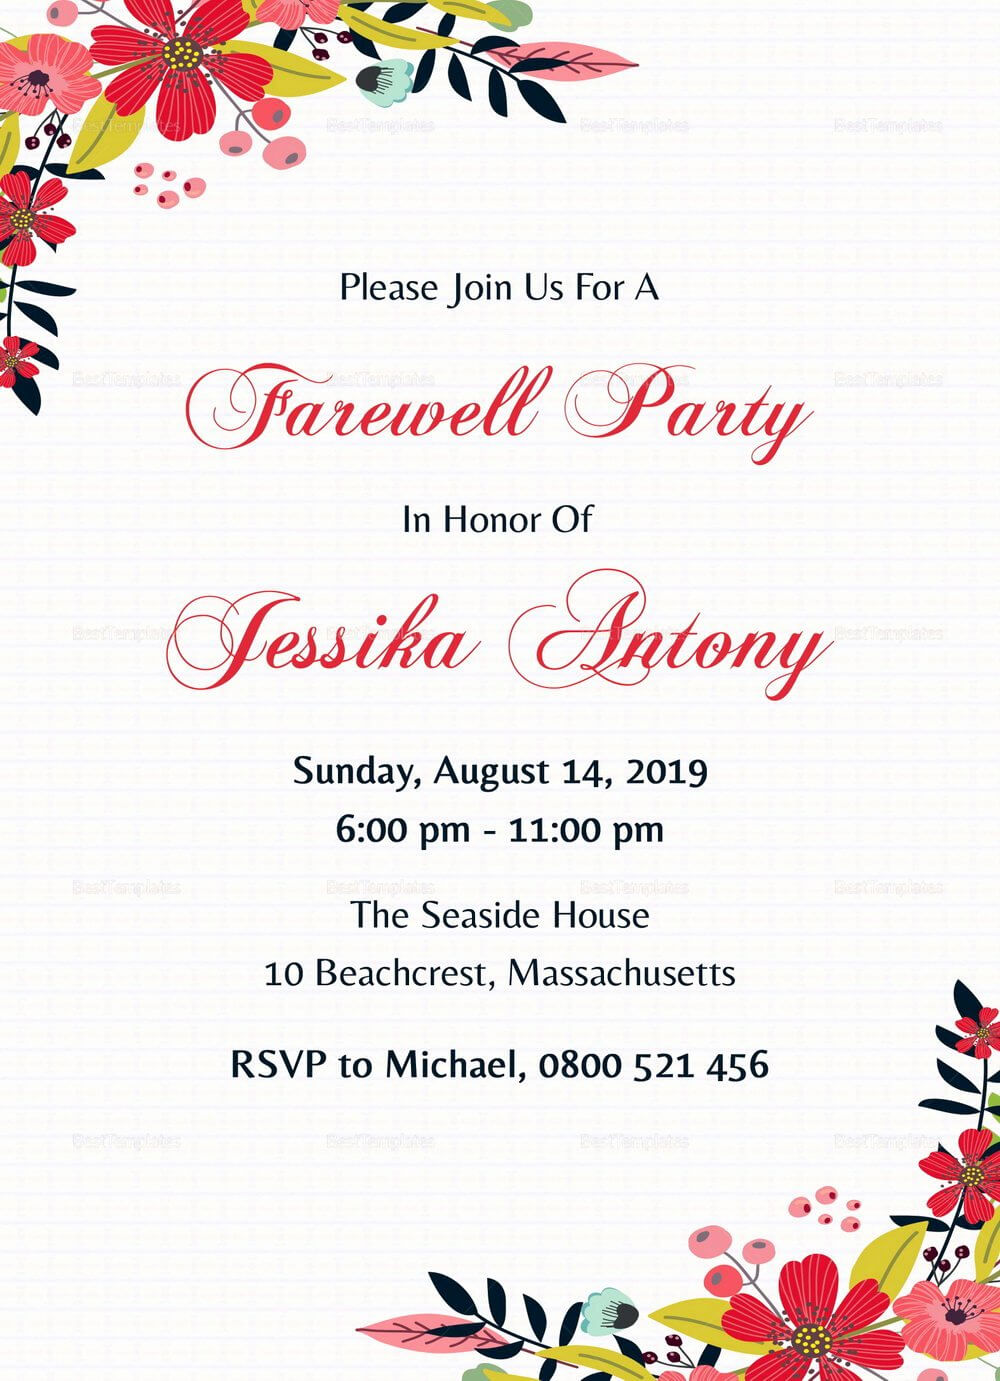 018 Farewell Party Flyer Template Free Lovely Invitation Pertaining To Farewell Card Template Word